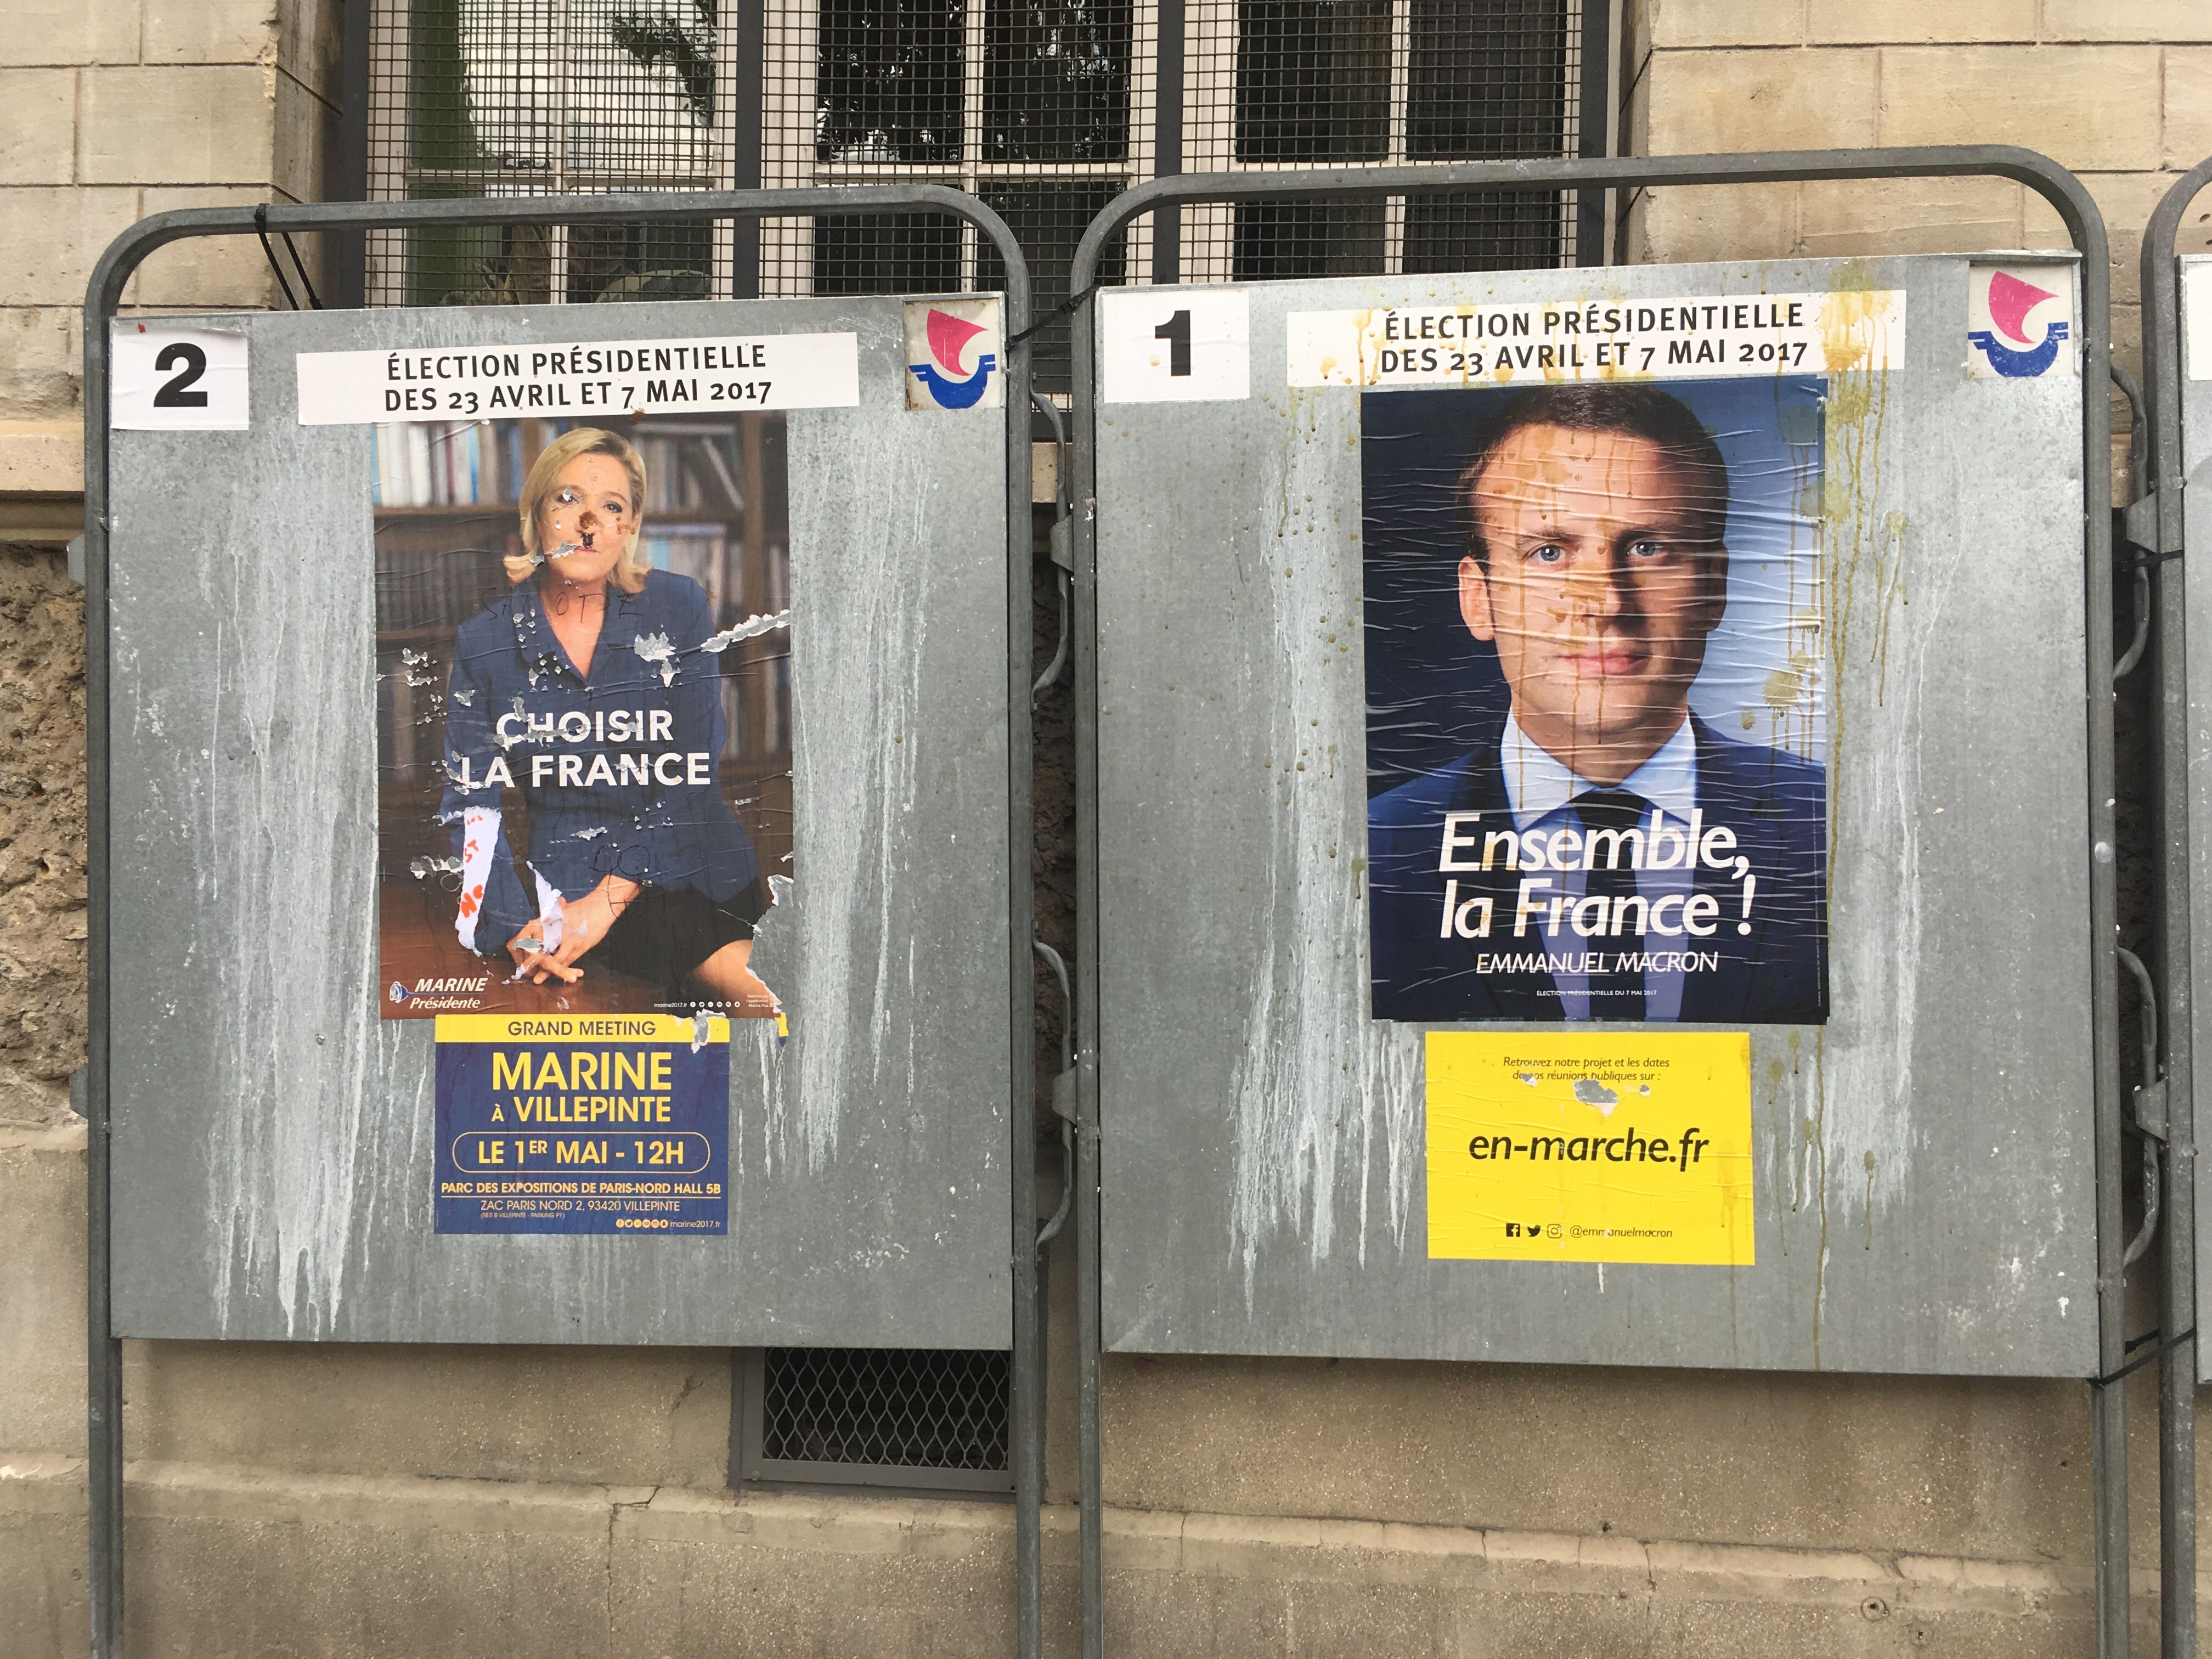 The French election campaign posters. Image by Sarah Widman. France, 2017.